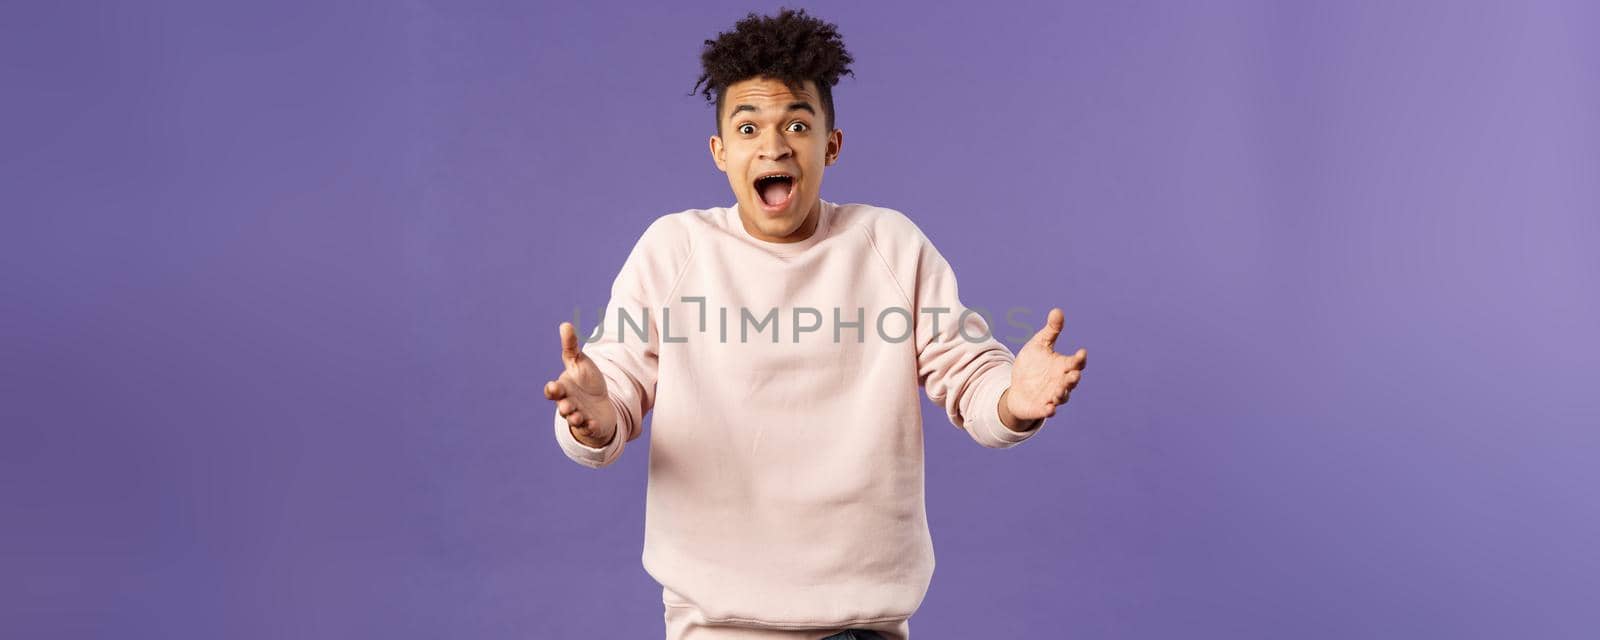 Portrait of surprised happy young man reaching hands to hug friend seeing him on street, rejoicing over big great news, standing impressed and thrilled over purple background.